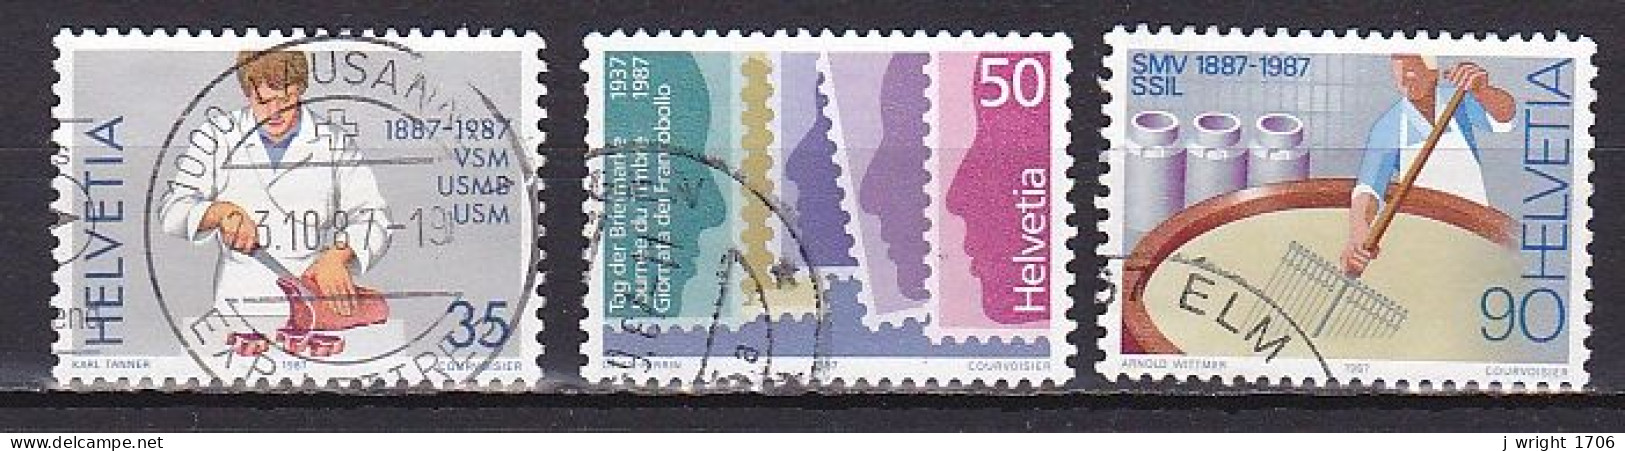 Switzerland, 1987, Stamp Day & Publicity Issue, Set, USED - Usados